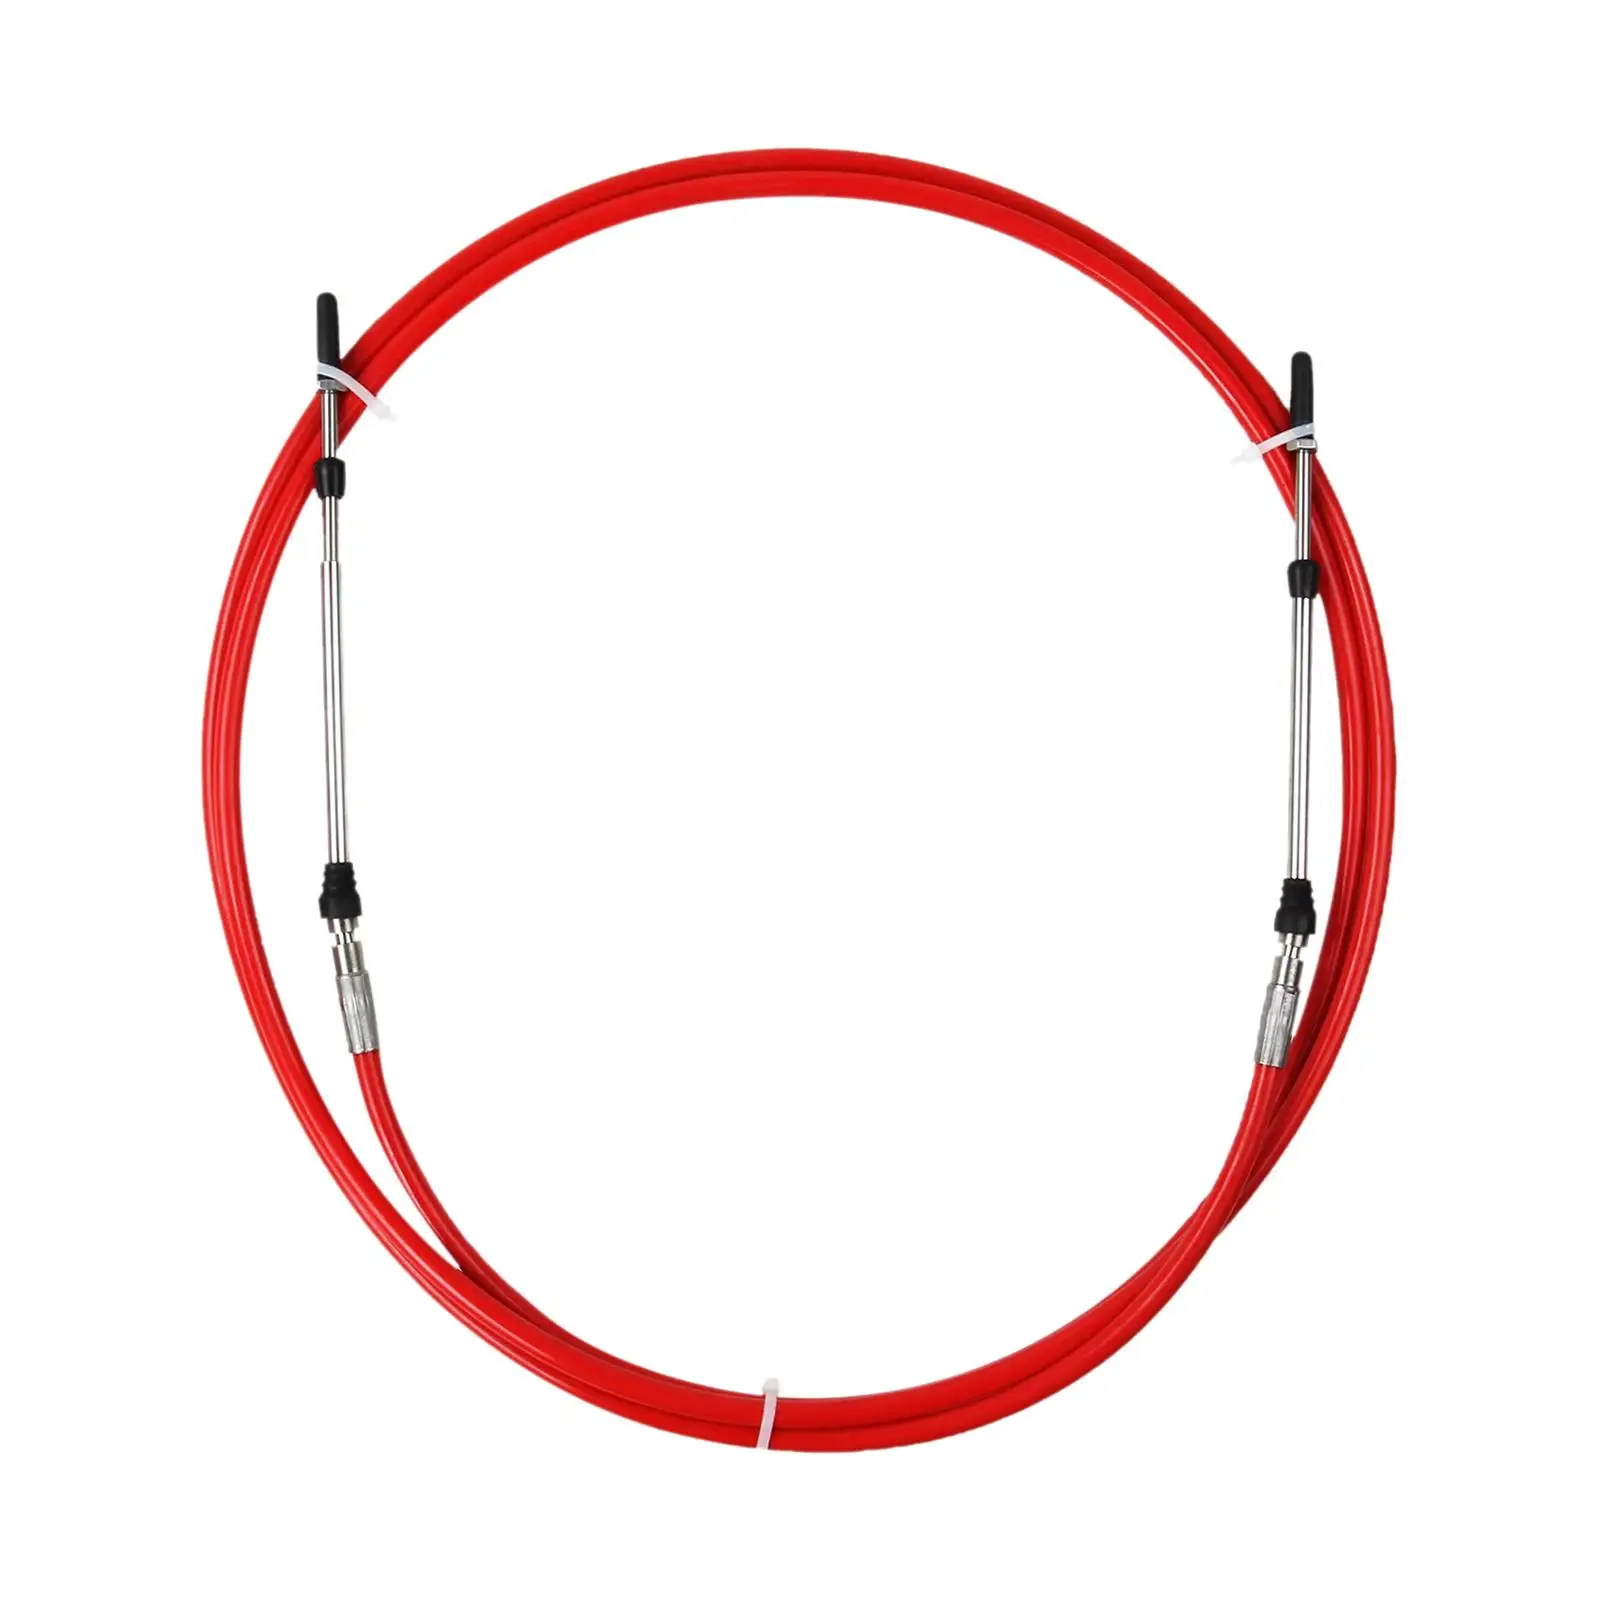 2 Pack Red Throttle  Remote Control Cable for Outboards 13 FT